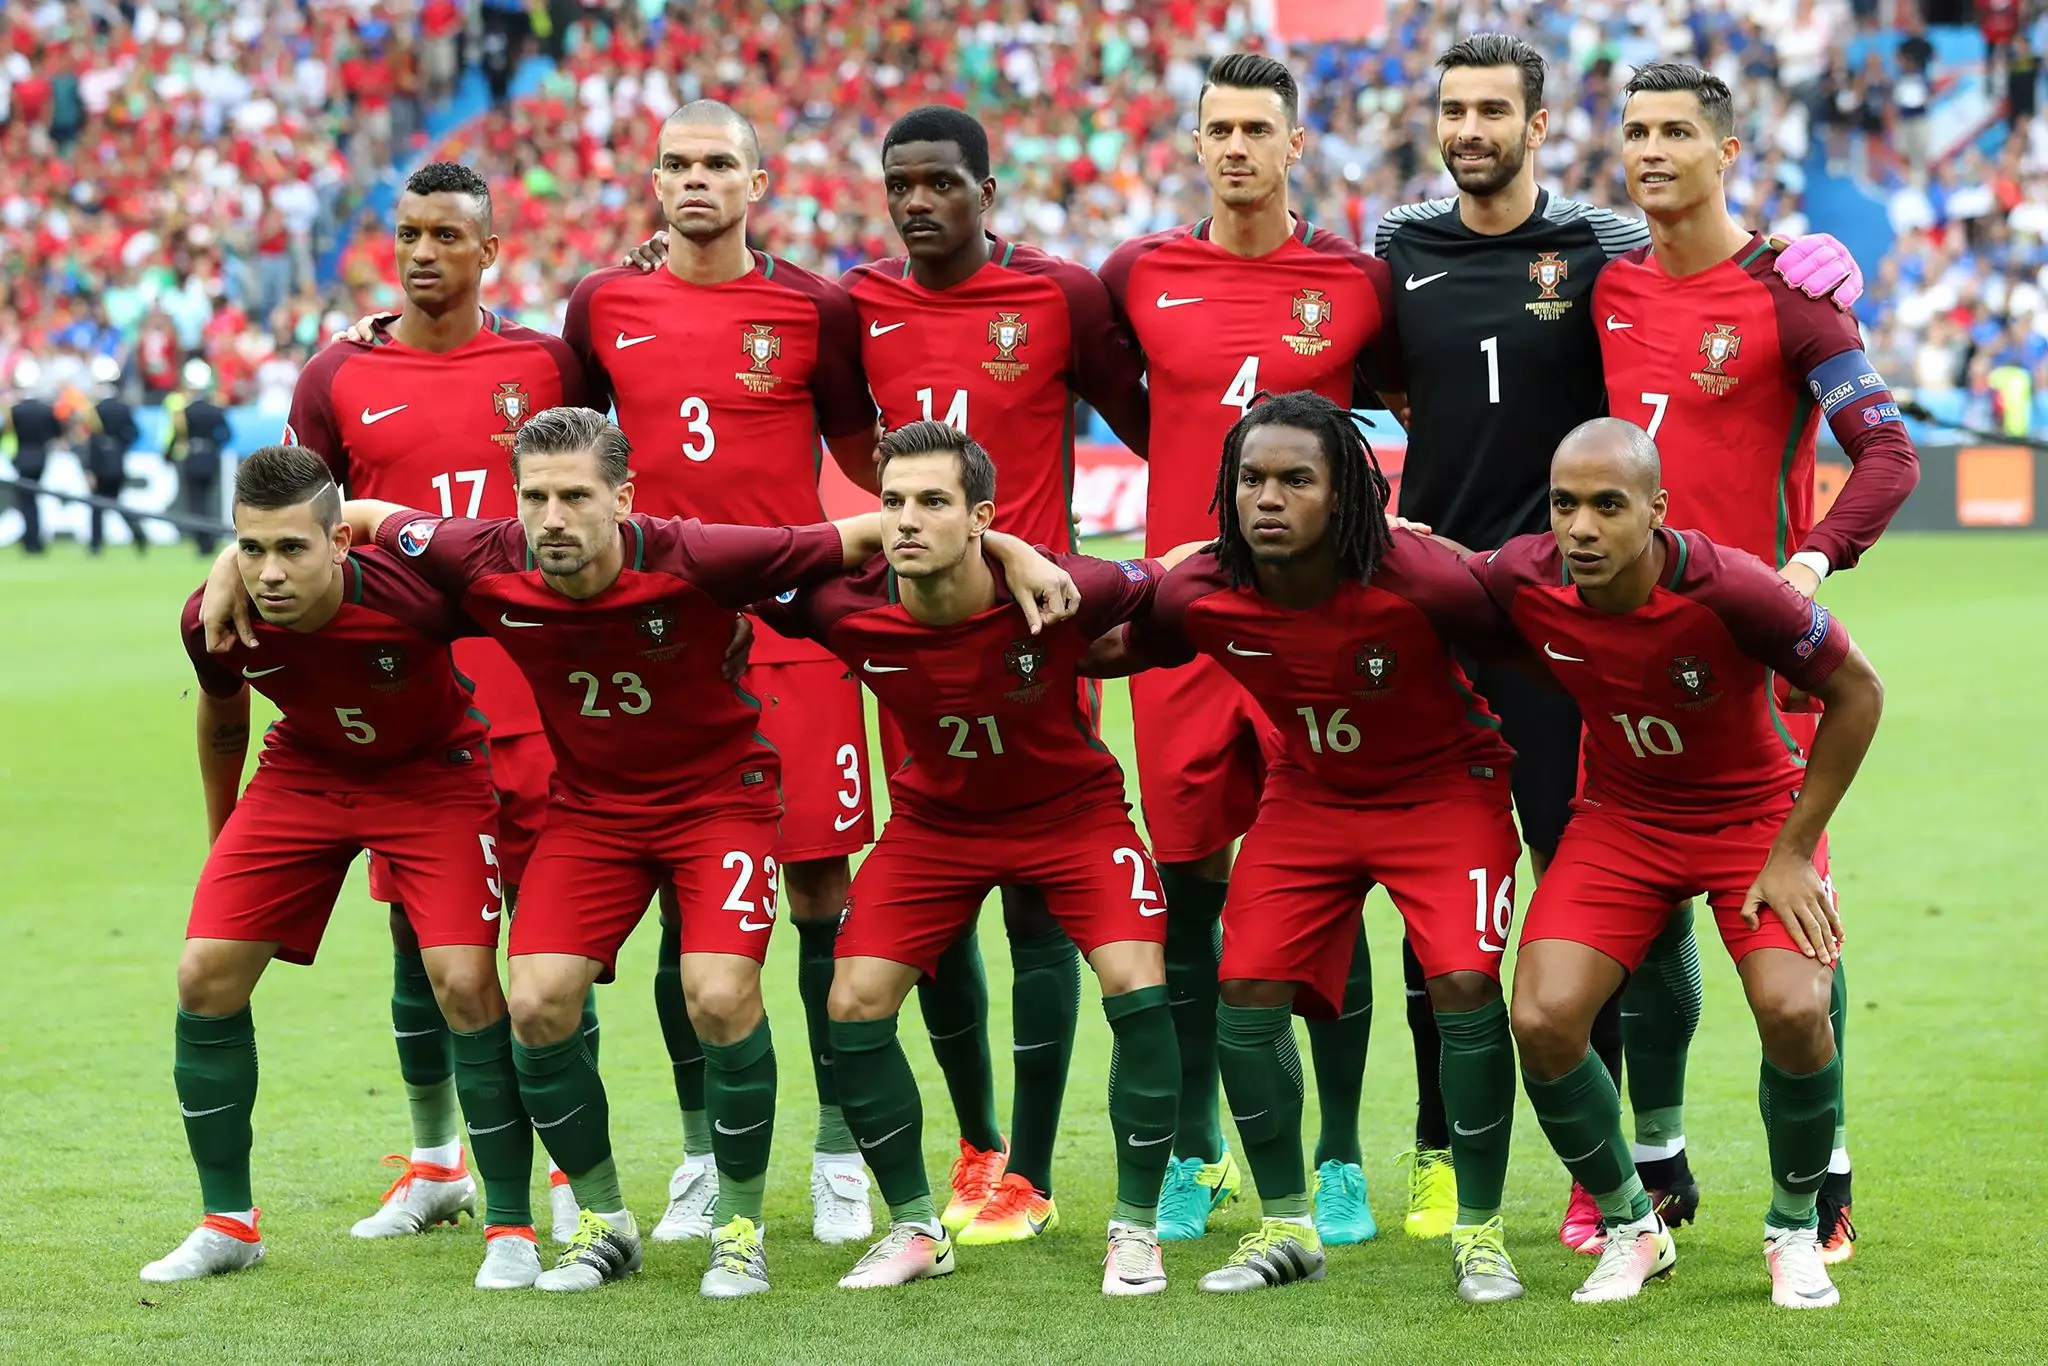 Portugal line up for the 2016 Euro final. Image: PA